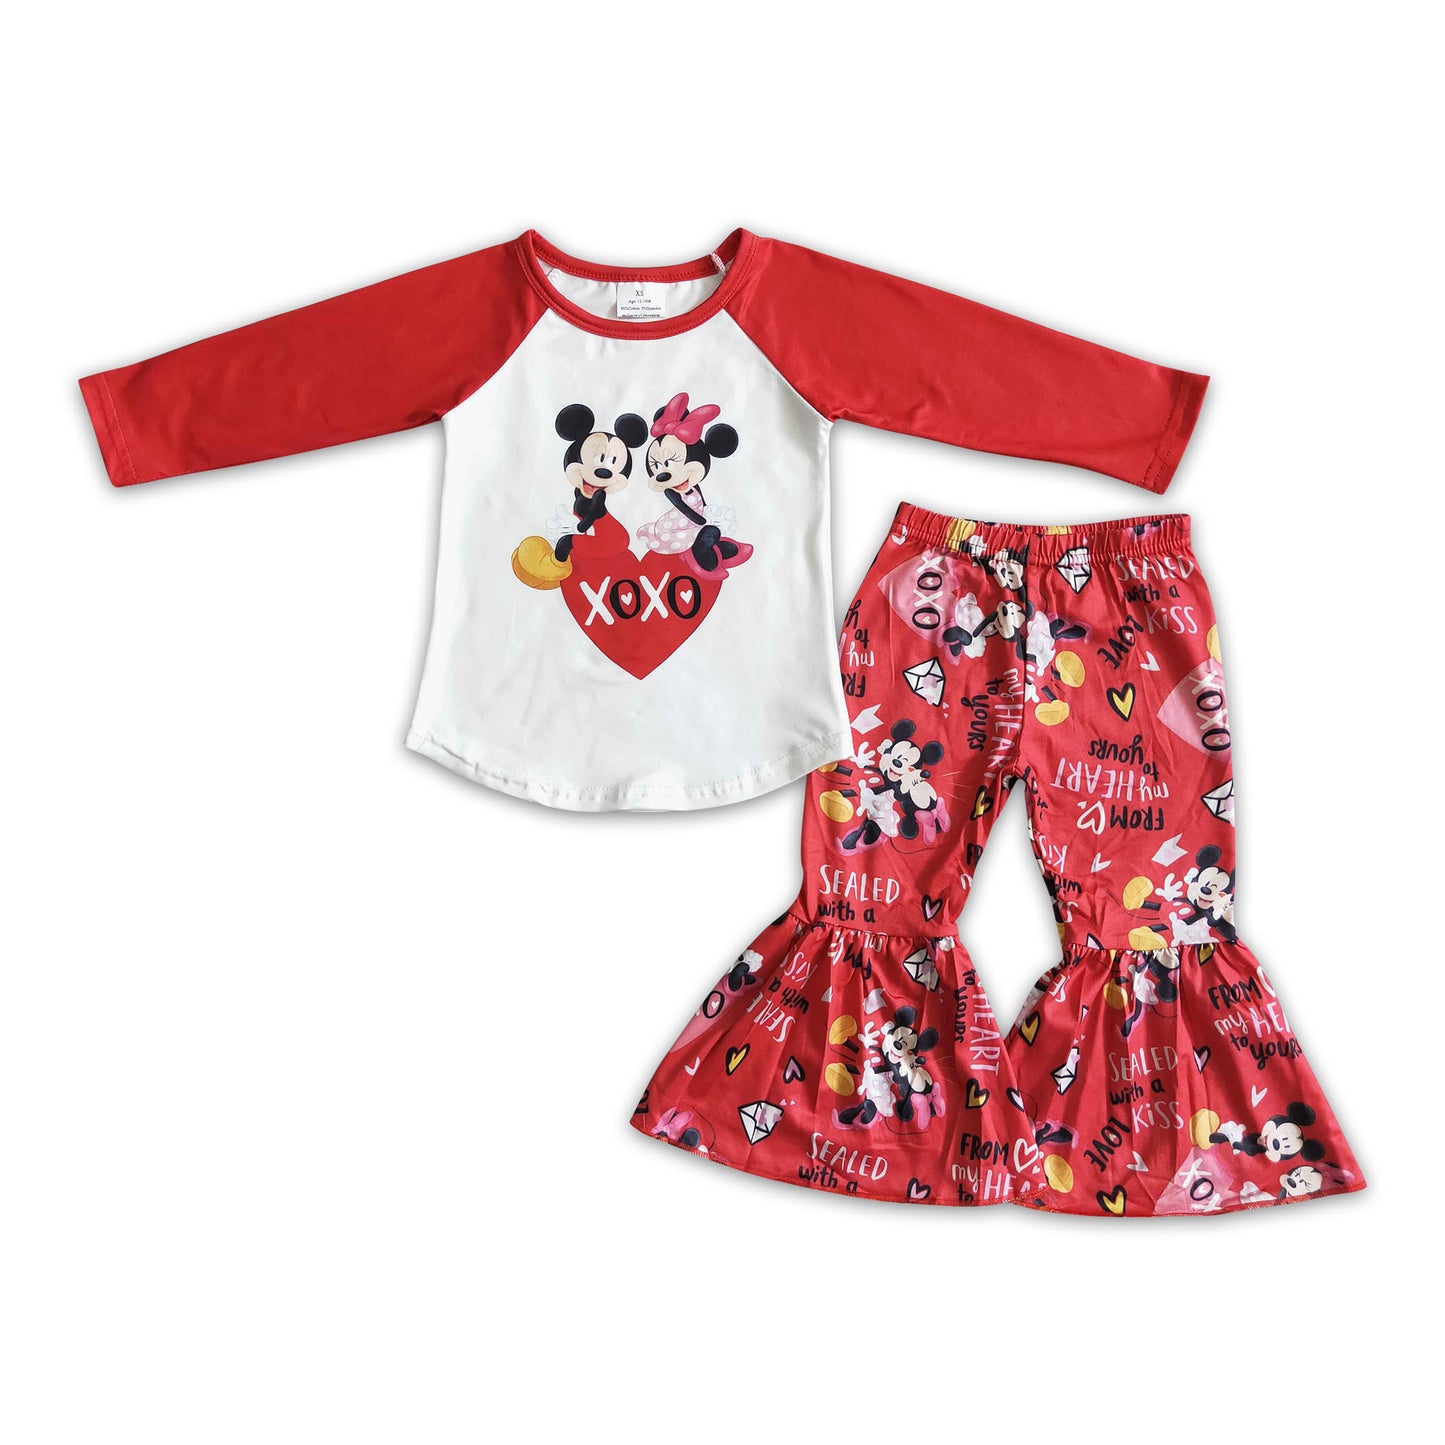 Heart mouse print red bell bottom pants girls Valentine's day clothing